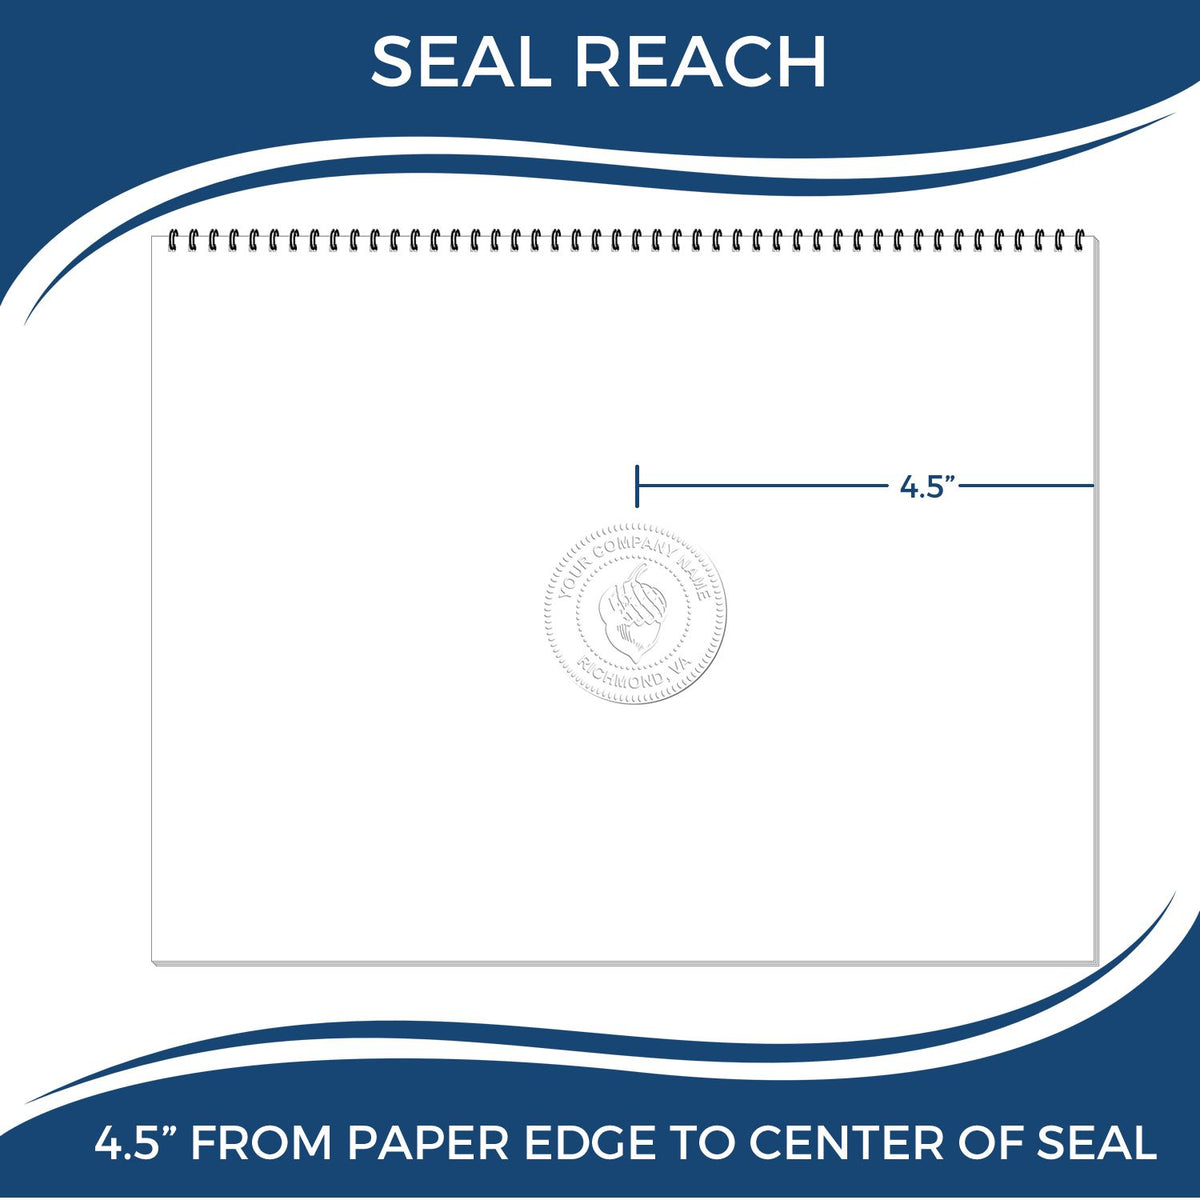 An infographic showing the seal reach which is represented by a ruler and a miniature seal image of the State of Minnesota Extended Long Reach Engineer Seal